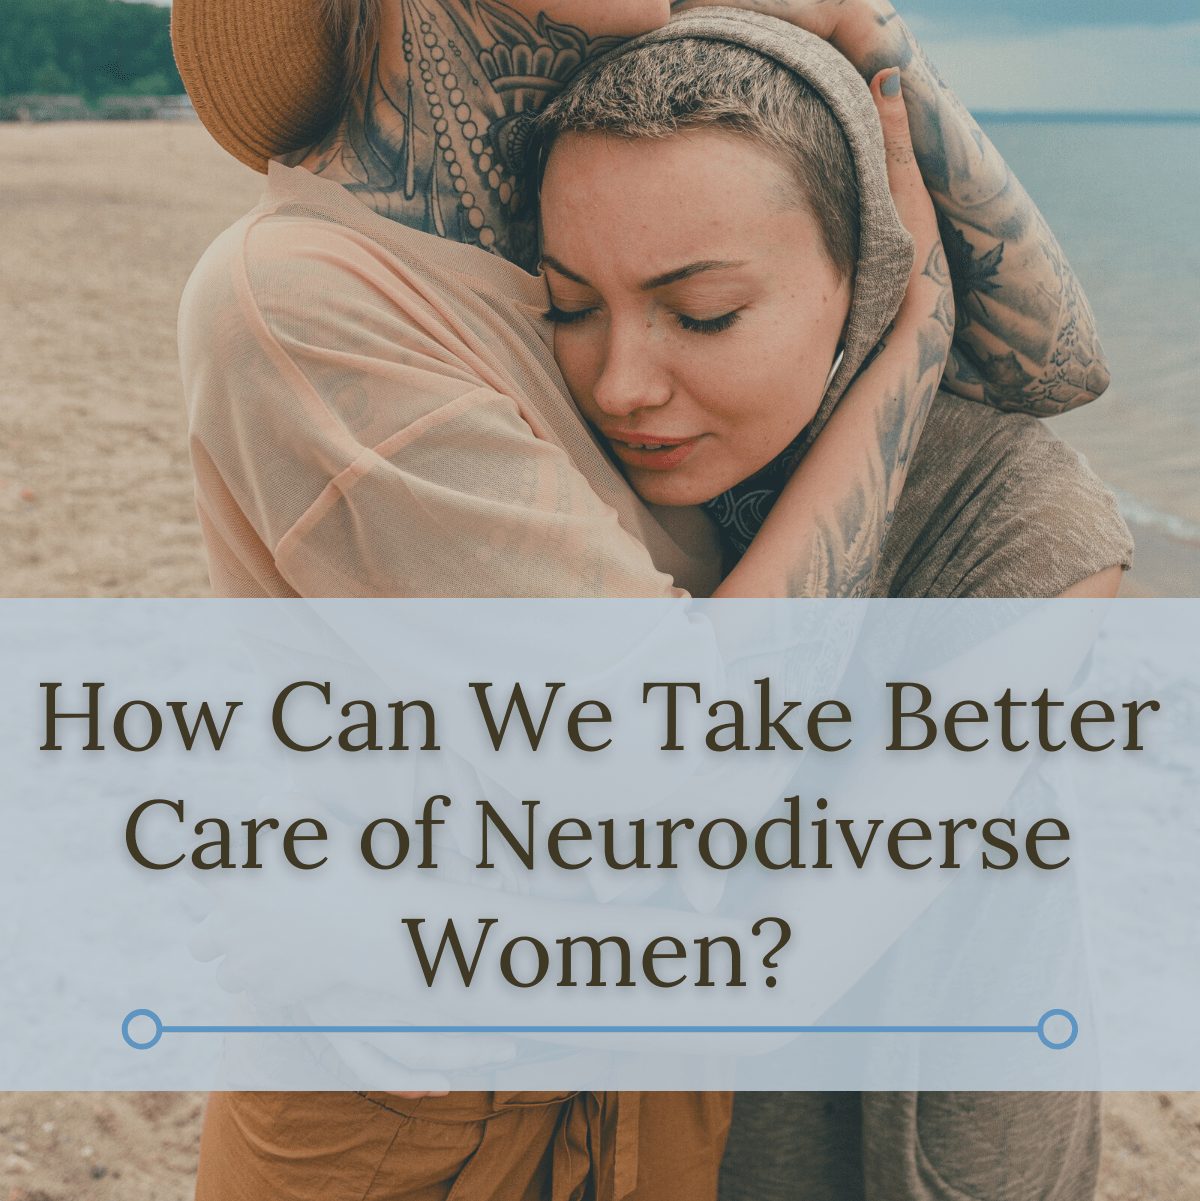 How Can We Take Better Care of Neurodiverse Women